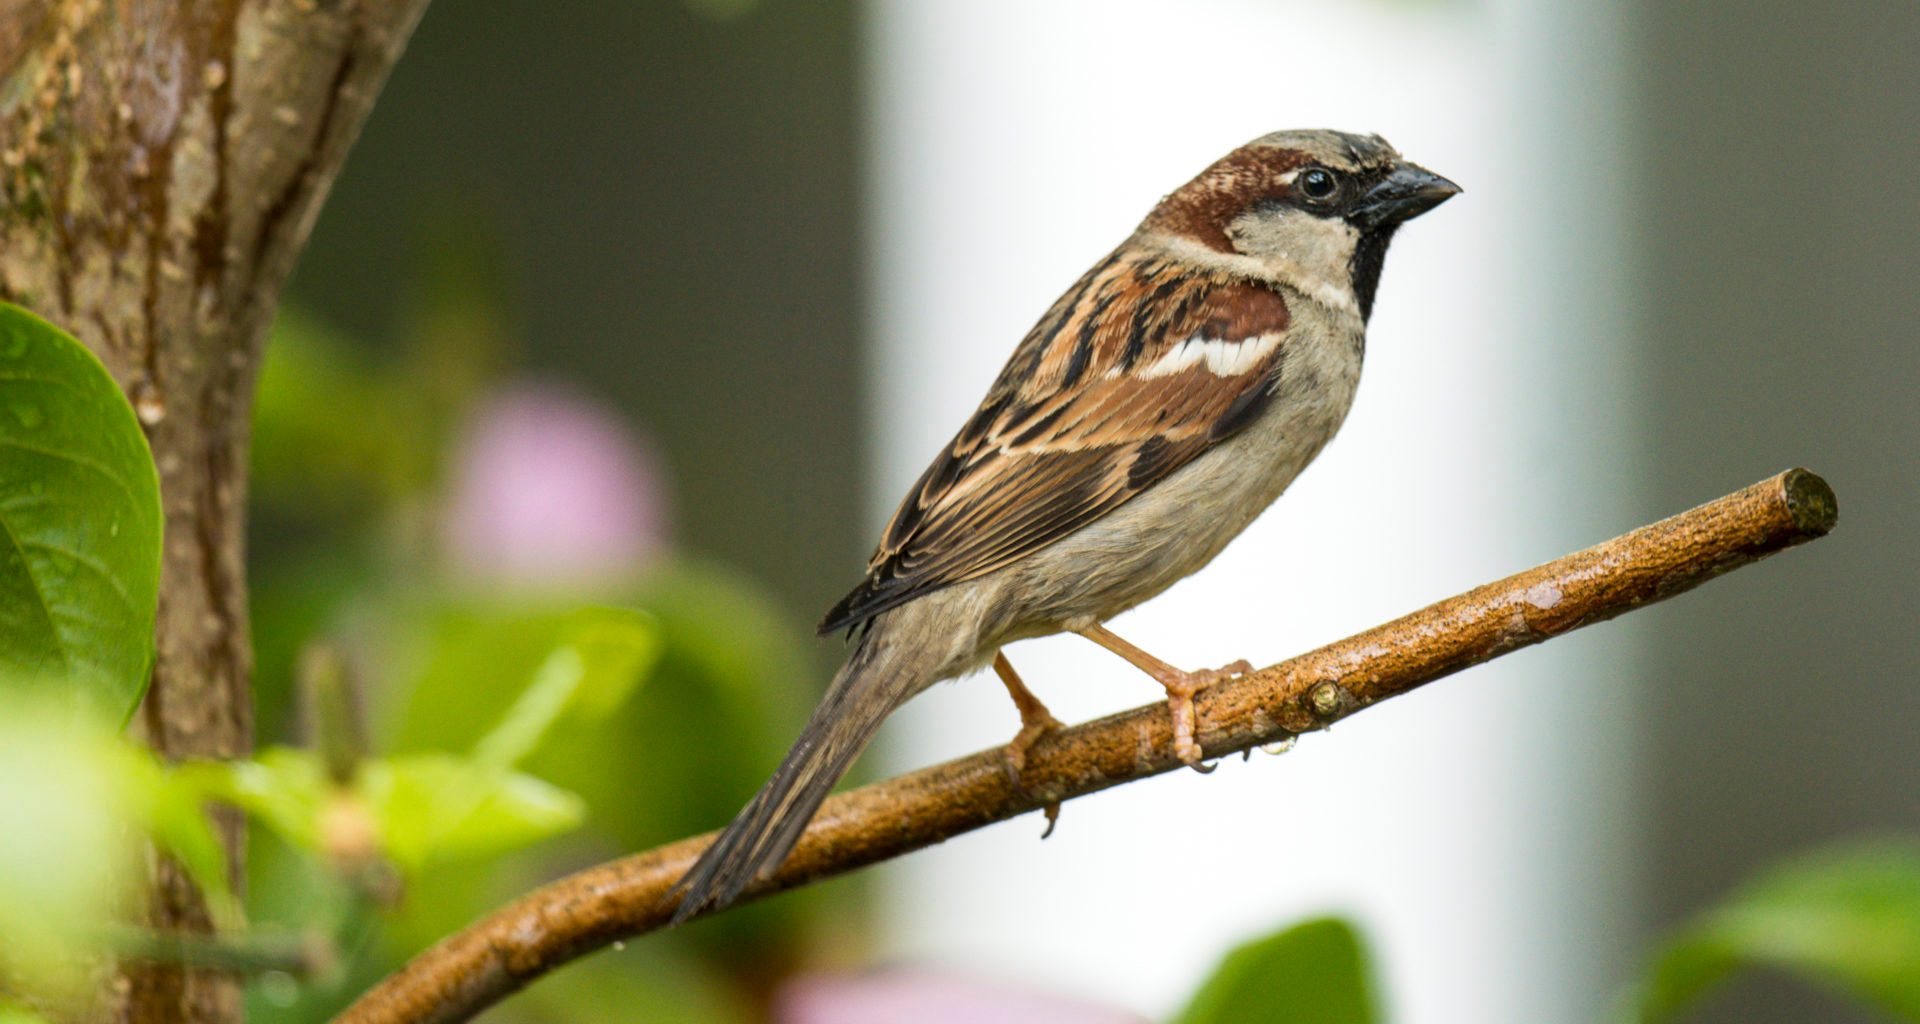 Animal rights groups condemn crude oil experiments on sparrows 7